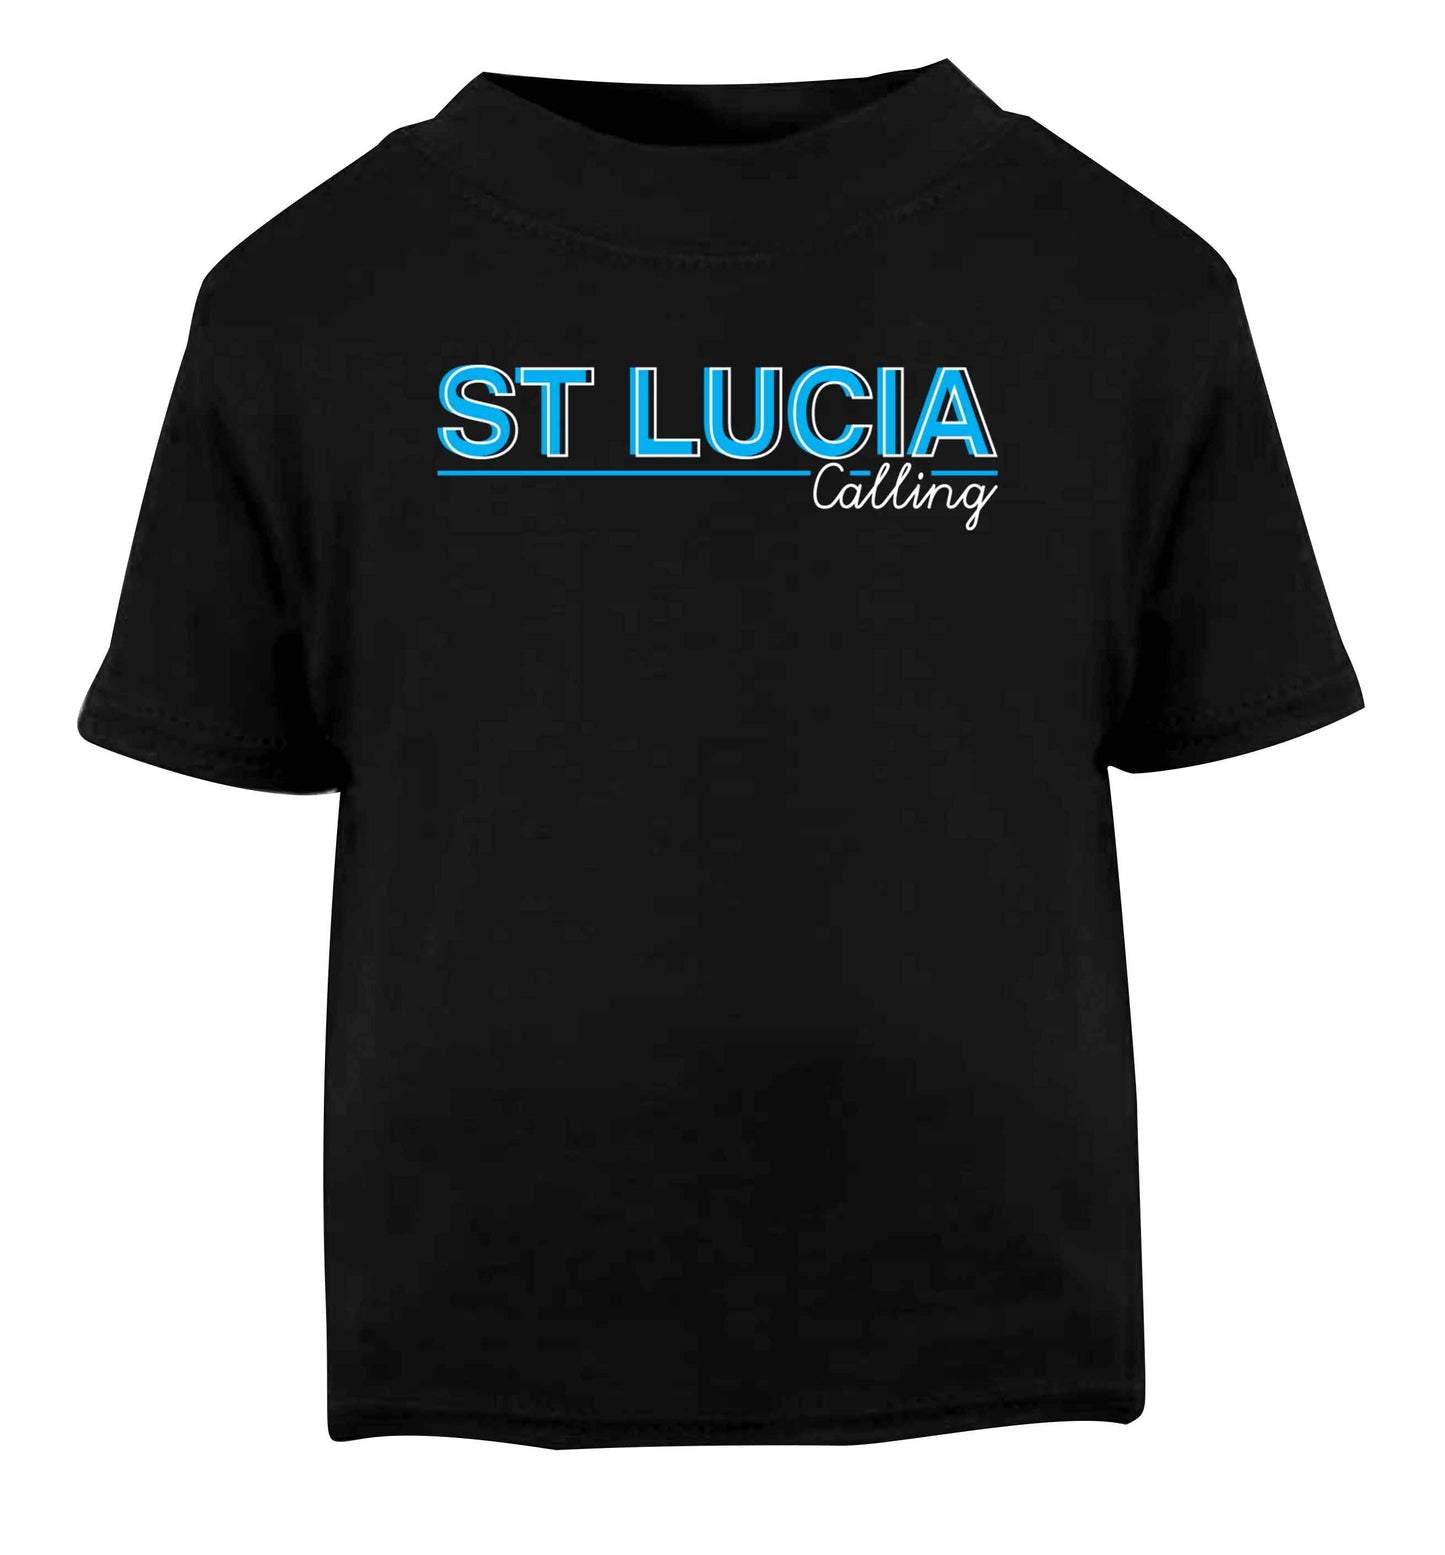 St Lucia calling Black Baby Toddler Tshirt 2 years